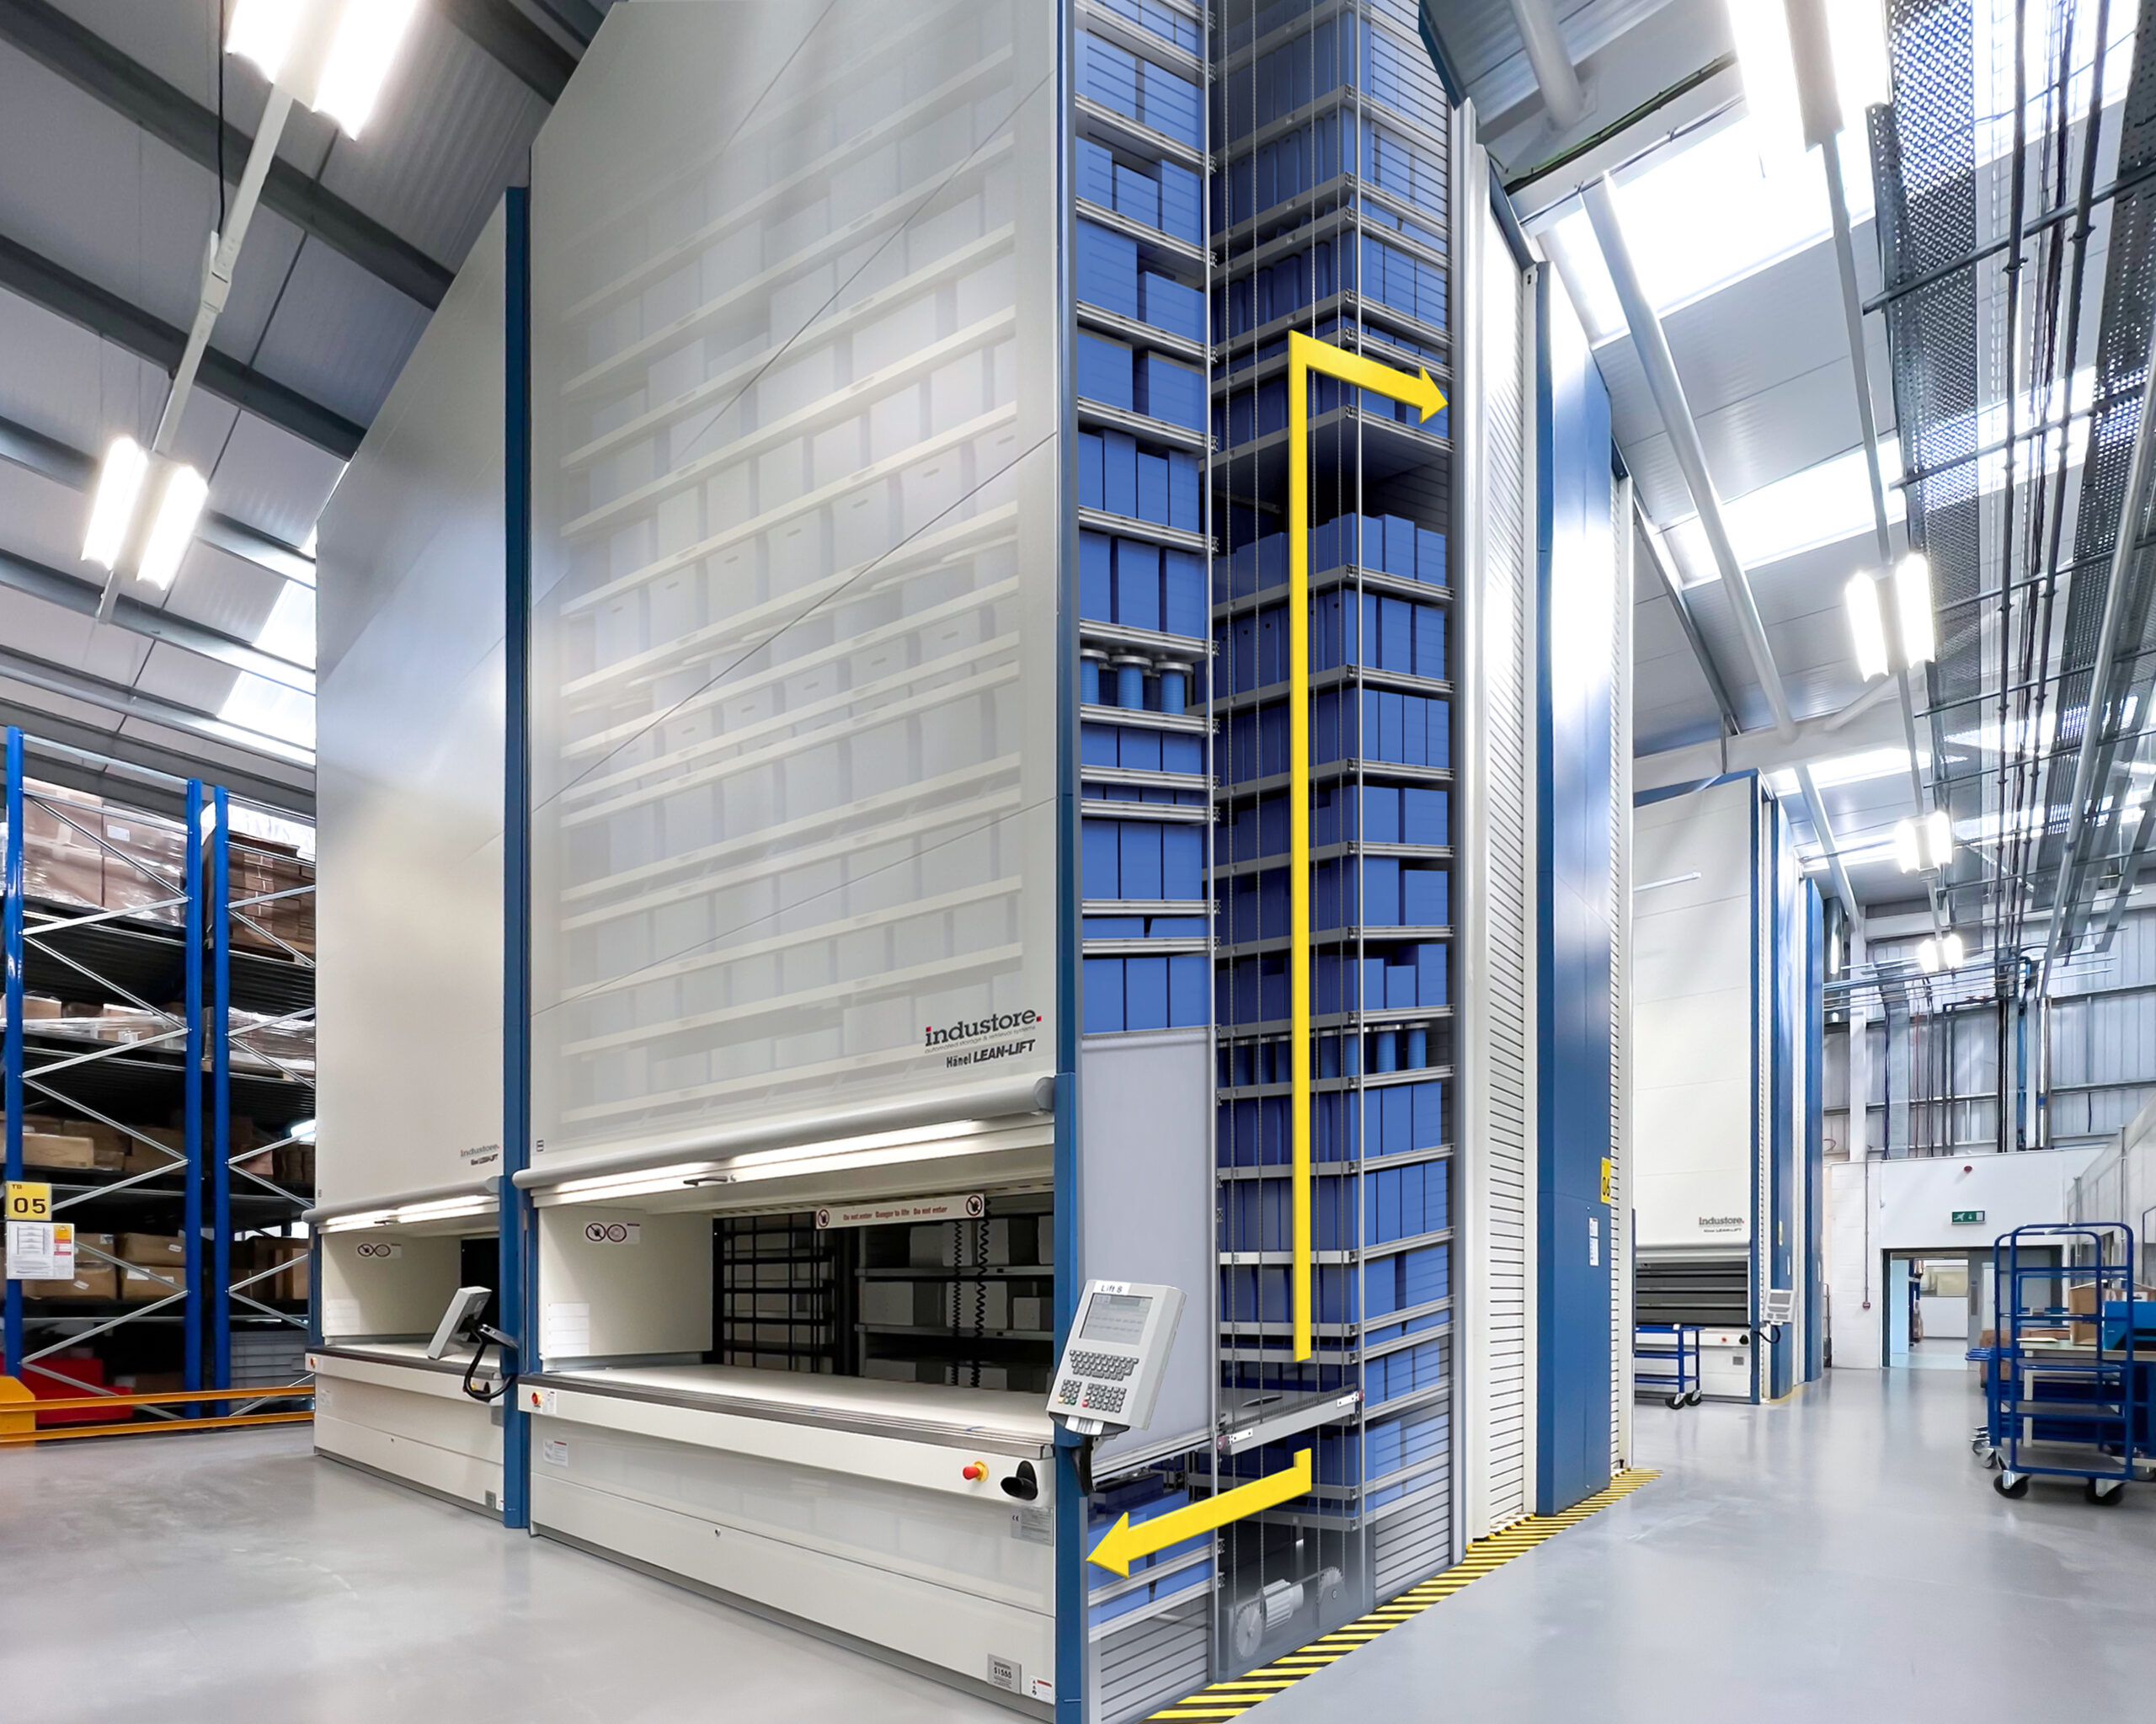 Automated Lift System: The Hanel Lean-Lift, a vertical storage module by Industore.